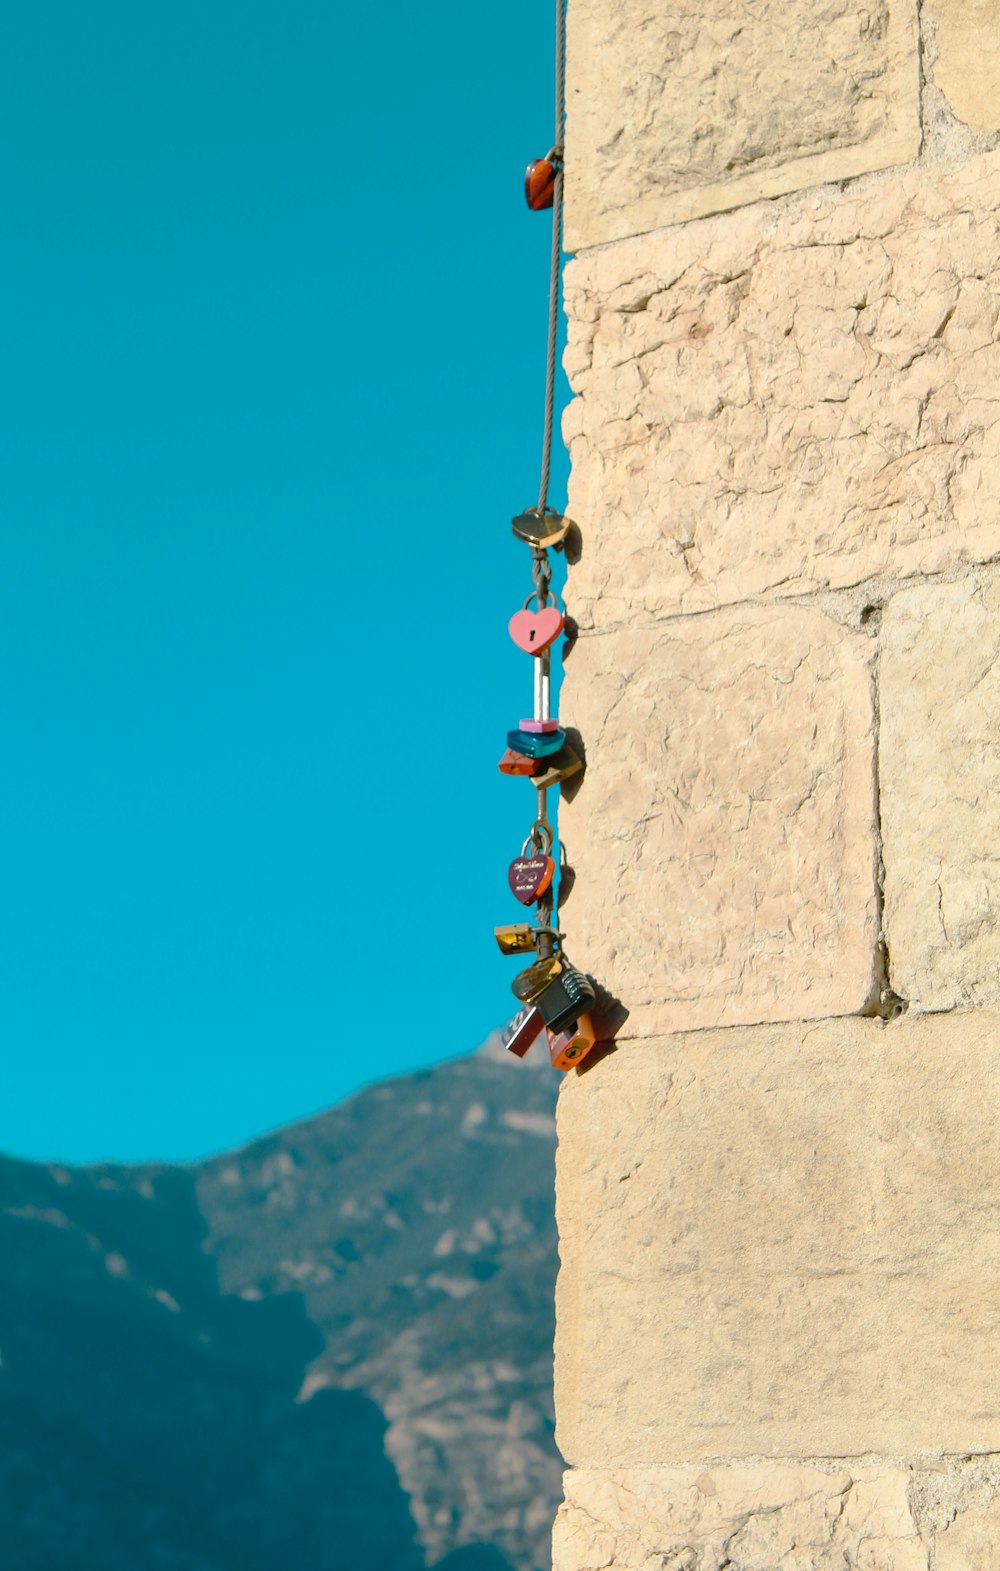 a group of shoes hanging from the side of a building